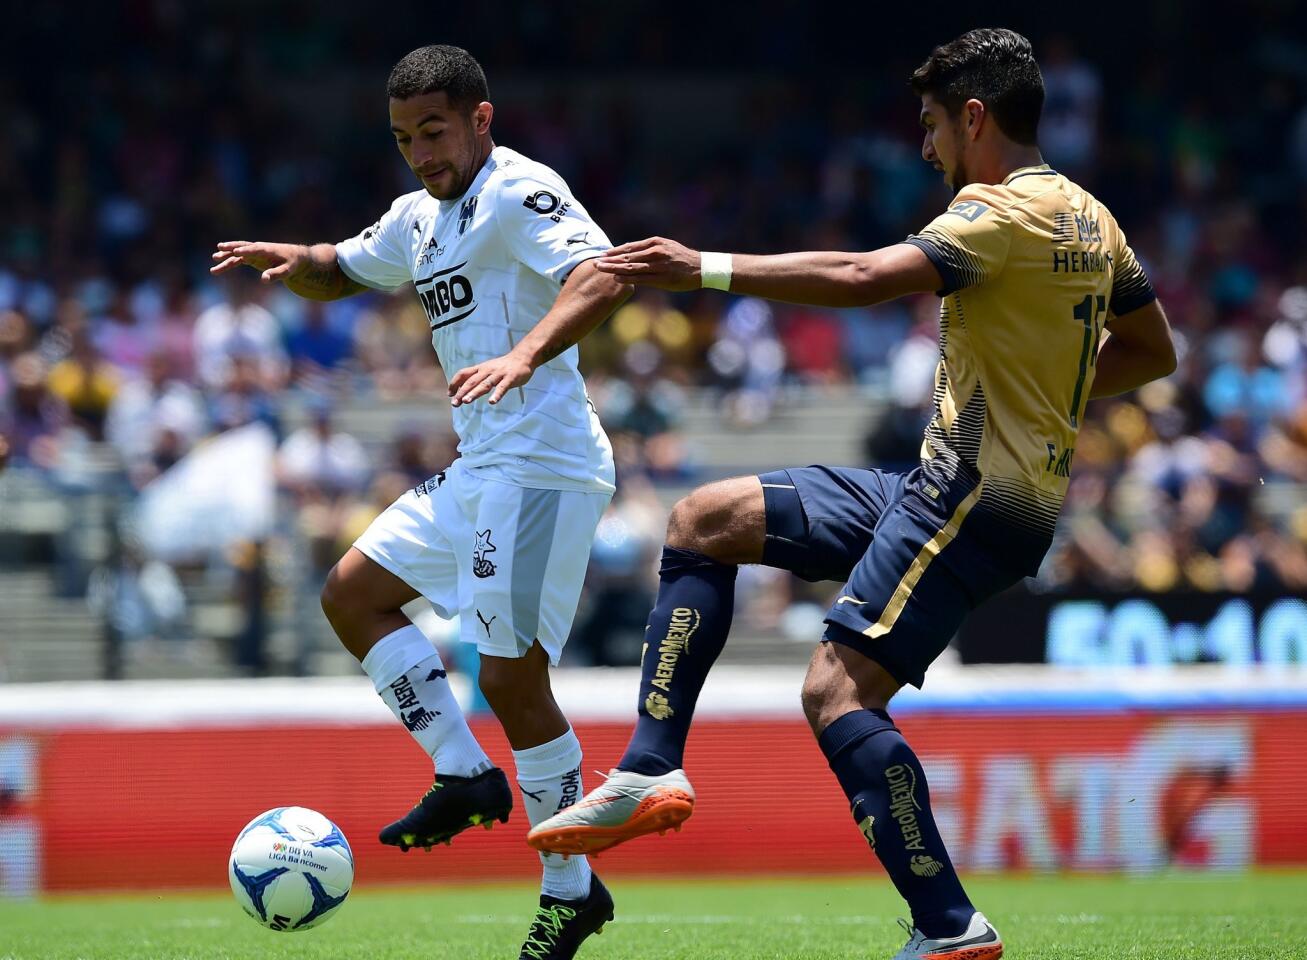 Eduardo Herrera (R) of Pumas marks Walter Gargano of Monterrey during their Mexican Apertura football tournament match, at the Universitario stadium in Mexico City on July 26, 2015. AFP PHOTO / RONALDO SCHEMIDTRONALDO SCHEMIDT/AFP/Getty Images ** OUTS - ELSENT, FPG - OUTS * NM, PH, VA if sourced by CT, LA or MoD **